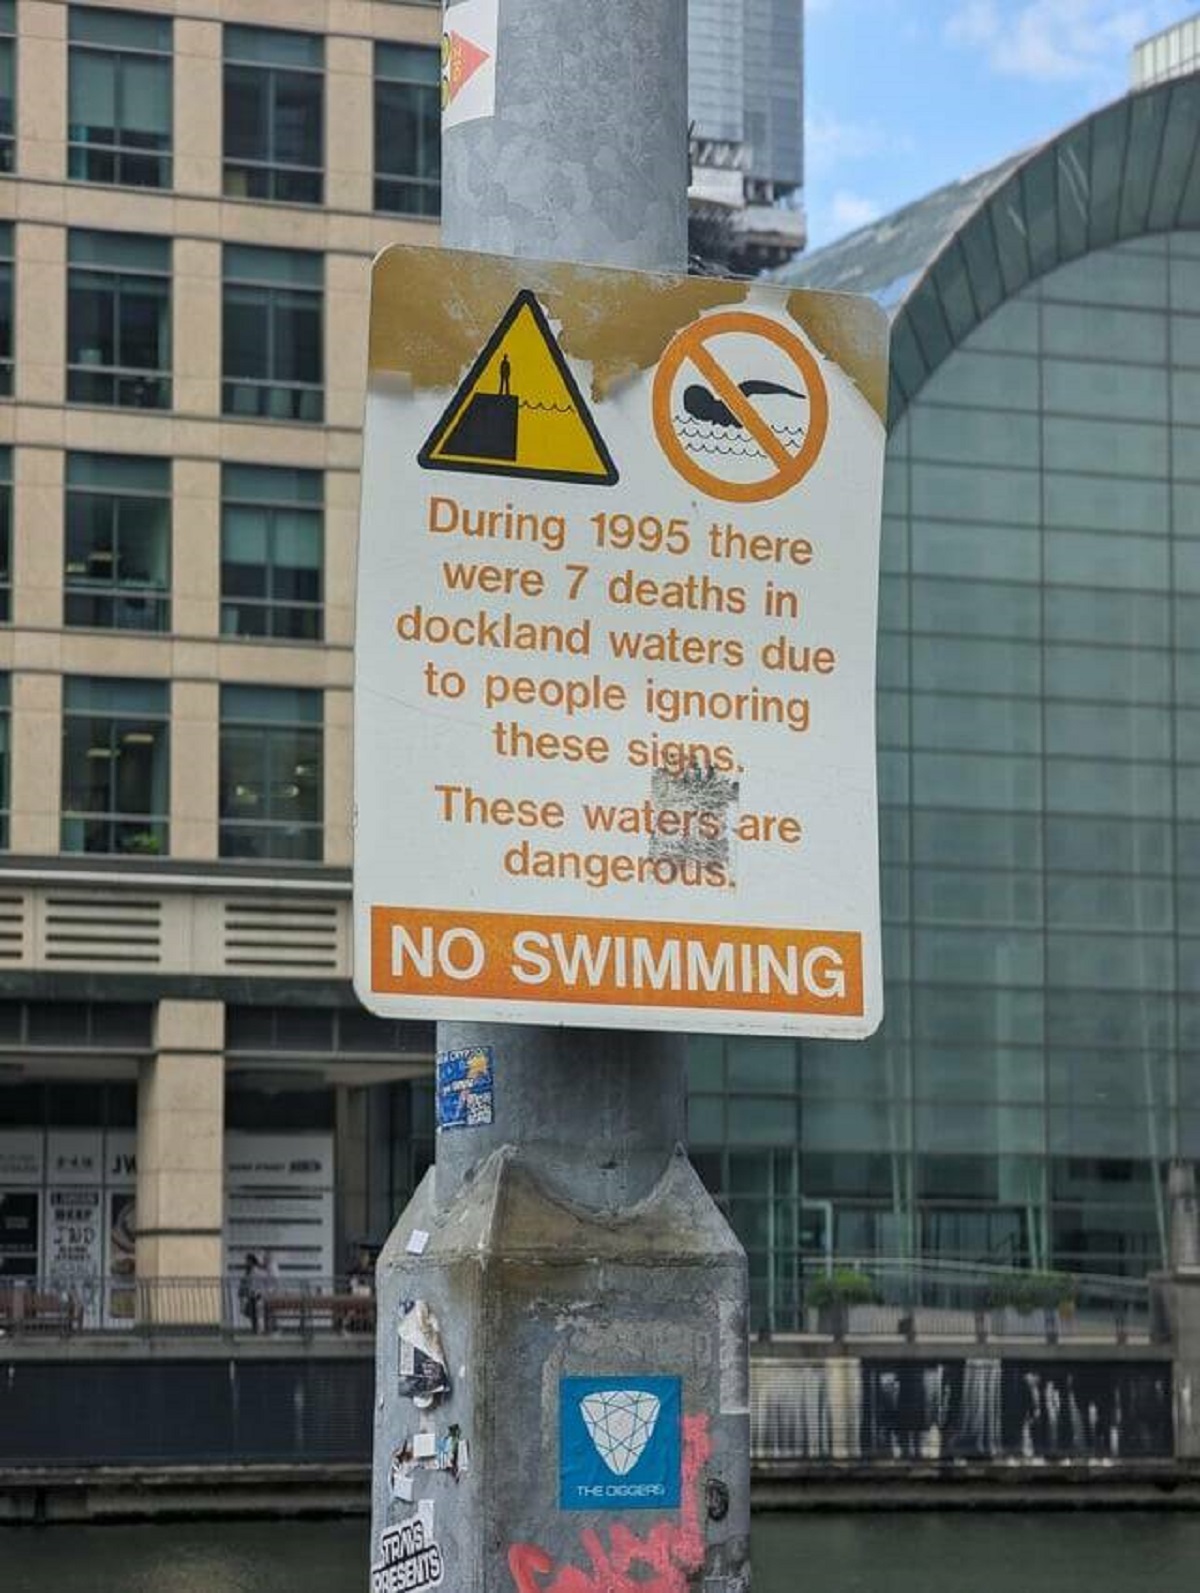 "Around London docklands there are signs about the risks of swimming in the canals"